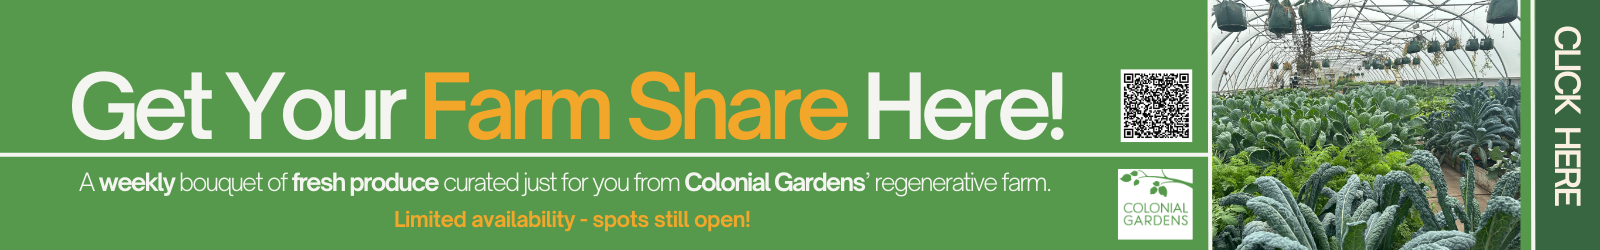 Get Your Farm Share Here!